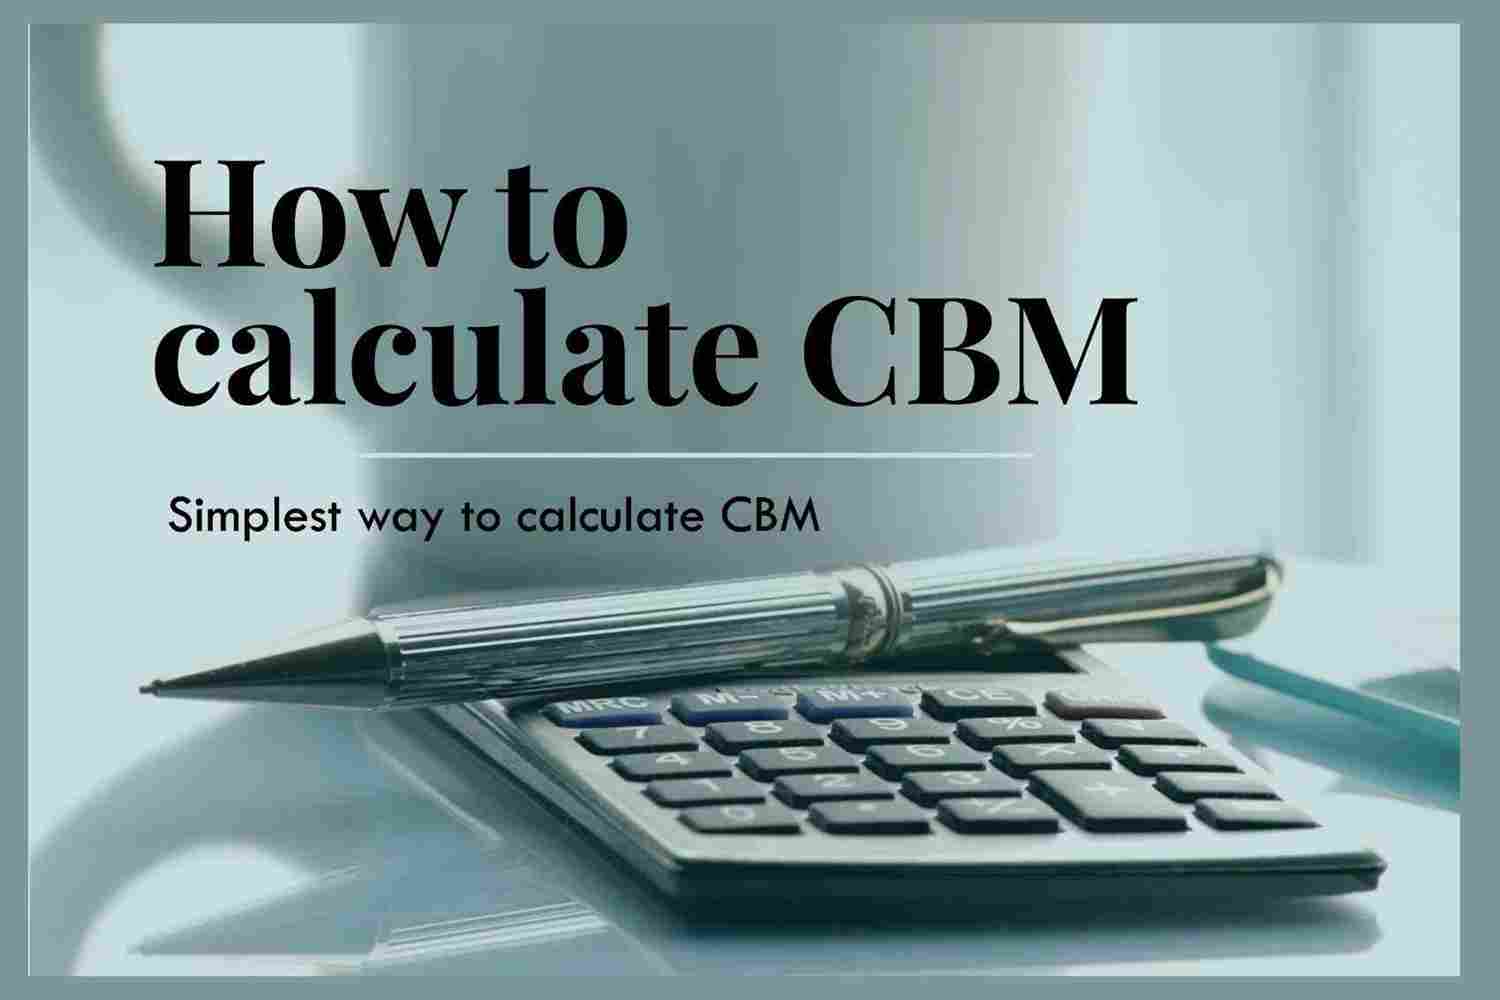 How to calculate CBM in the simplest way possible